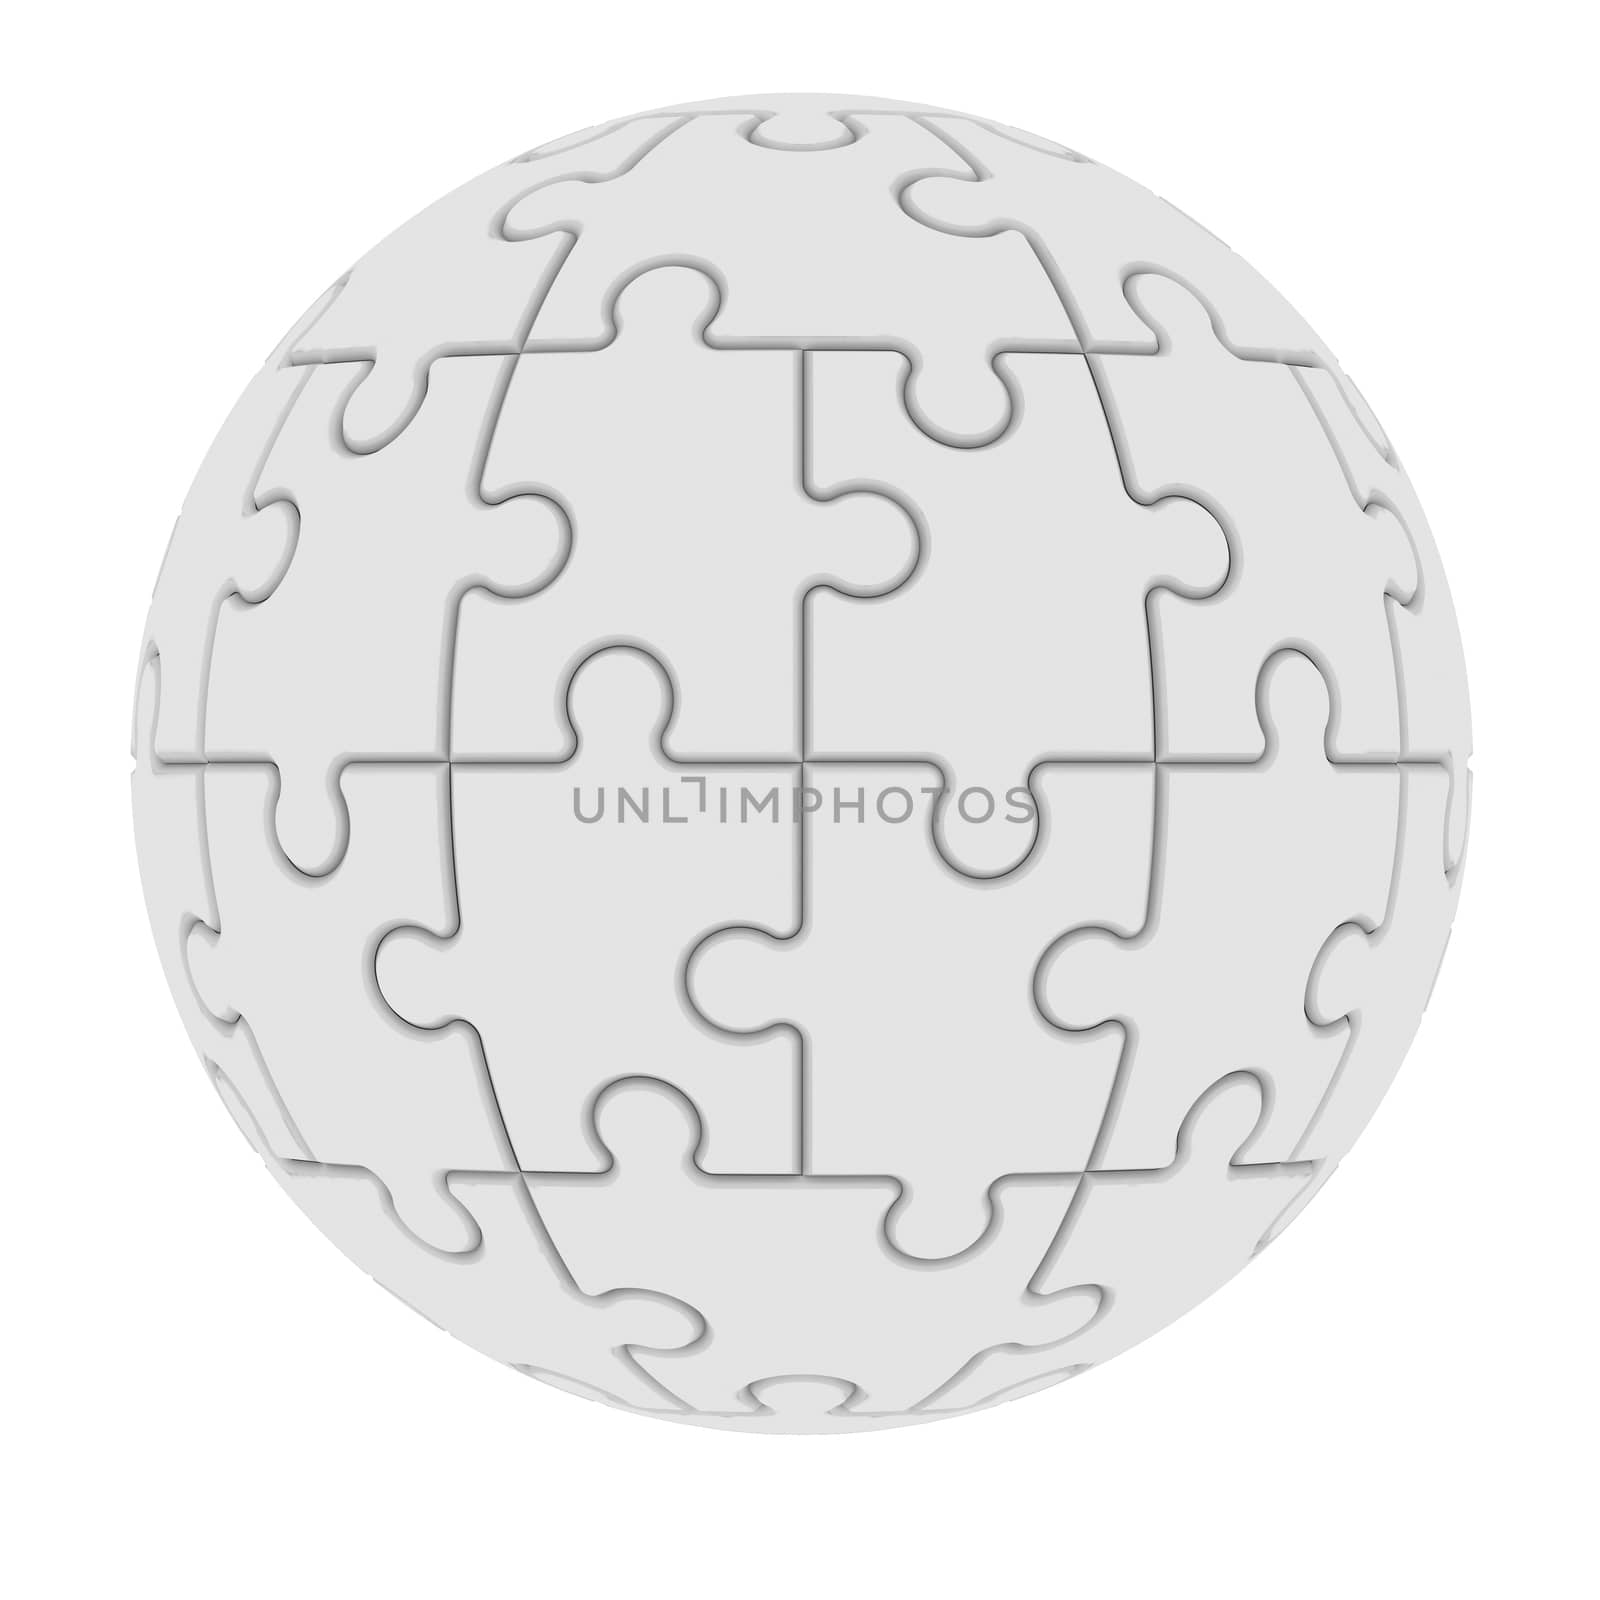 Sphere consisting of puzzles by cherezoff